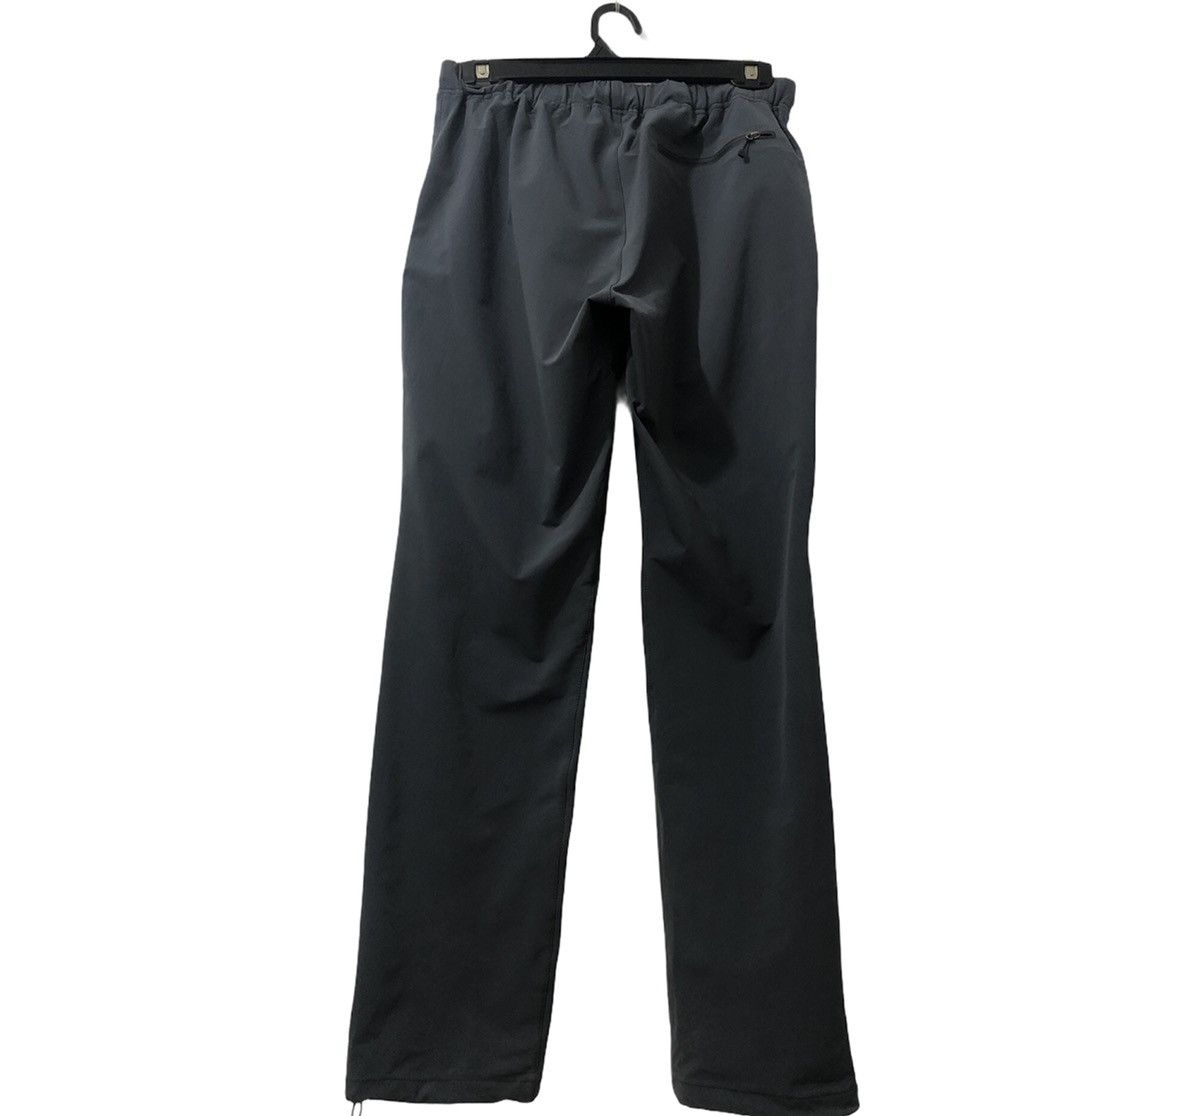 North face NTW57013 casual / hiking pant - 2